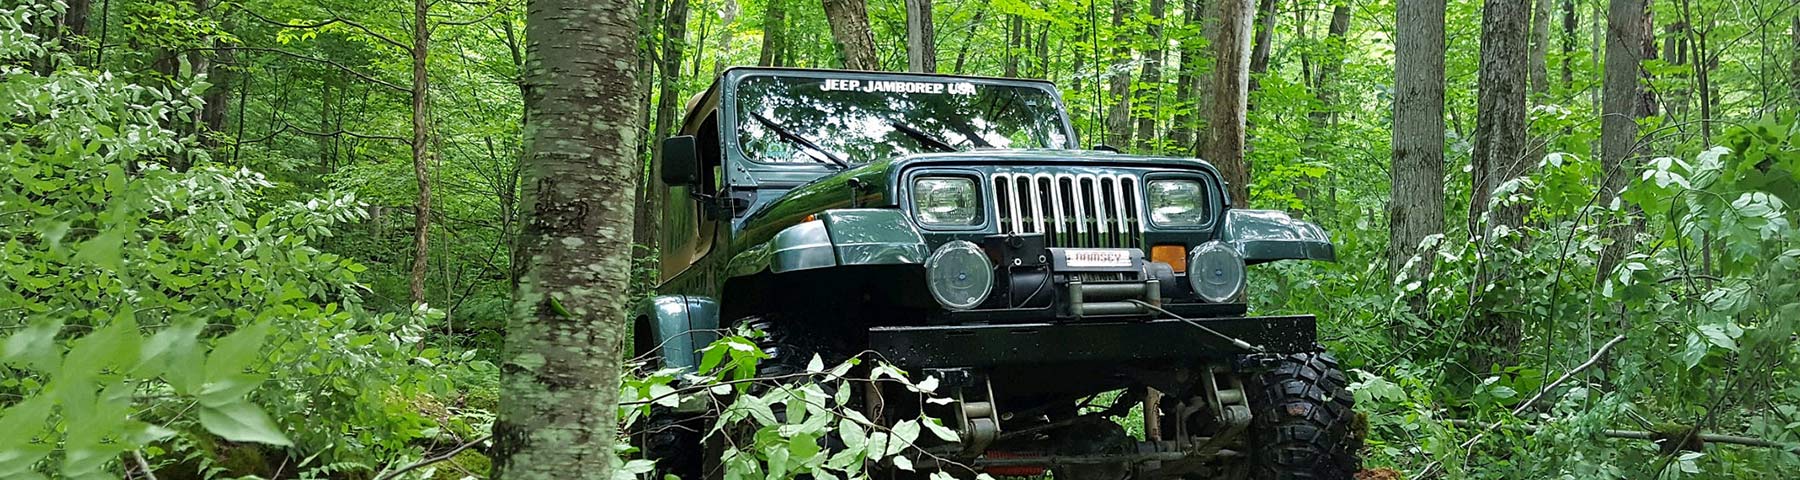 penns woods jeep trip